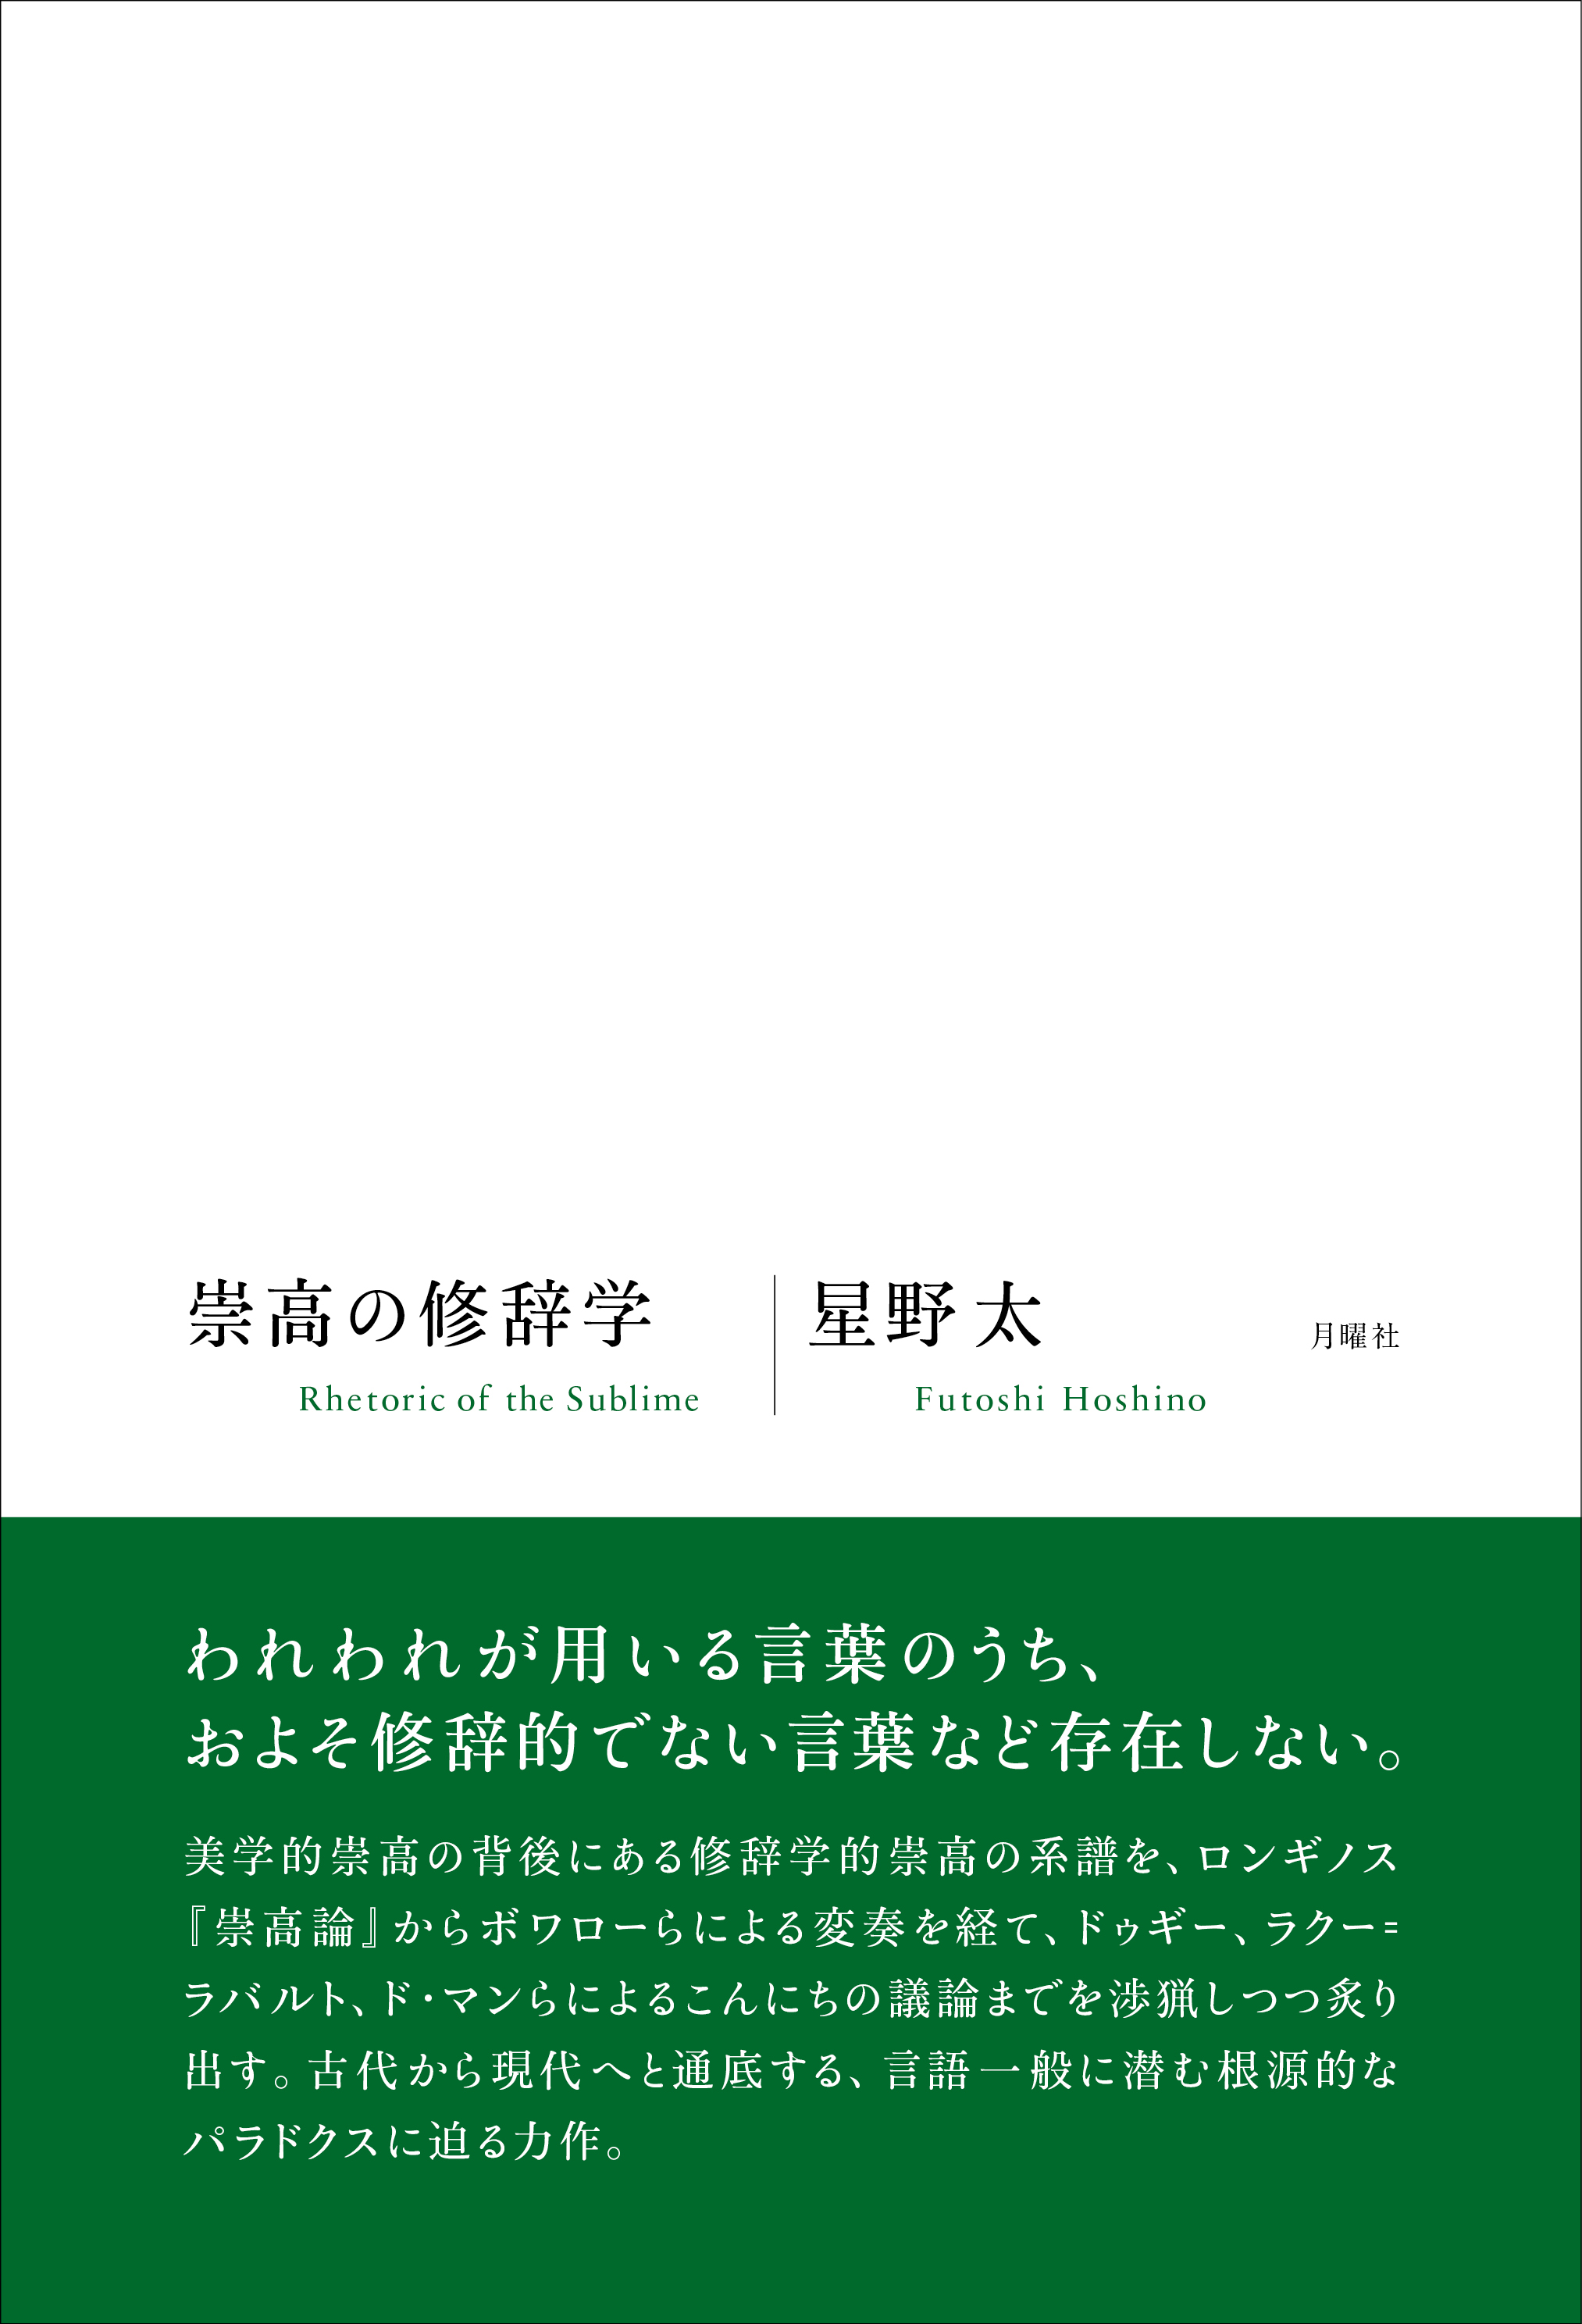 a white cover with green obi